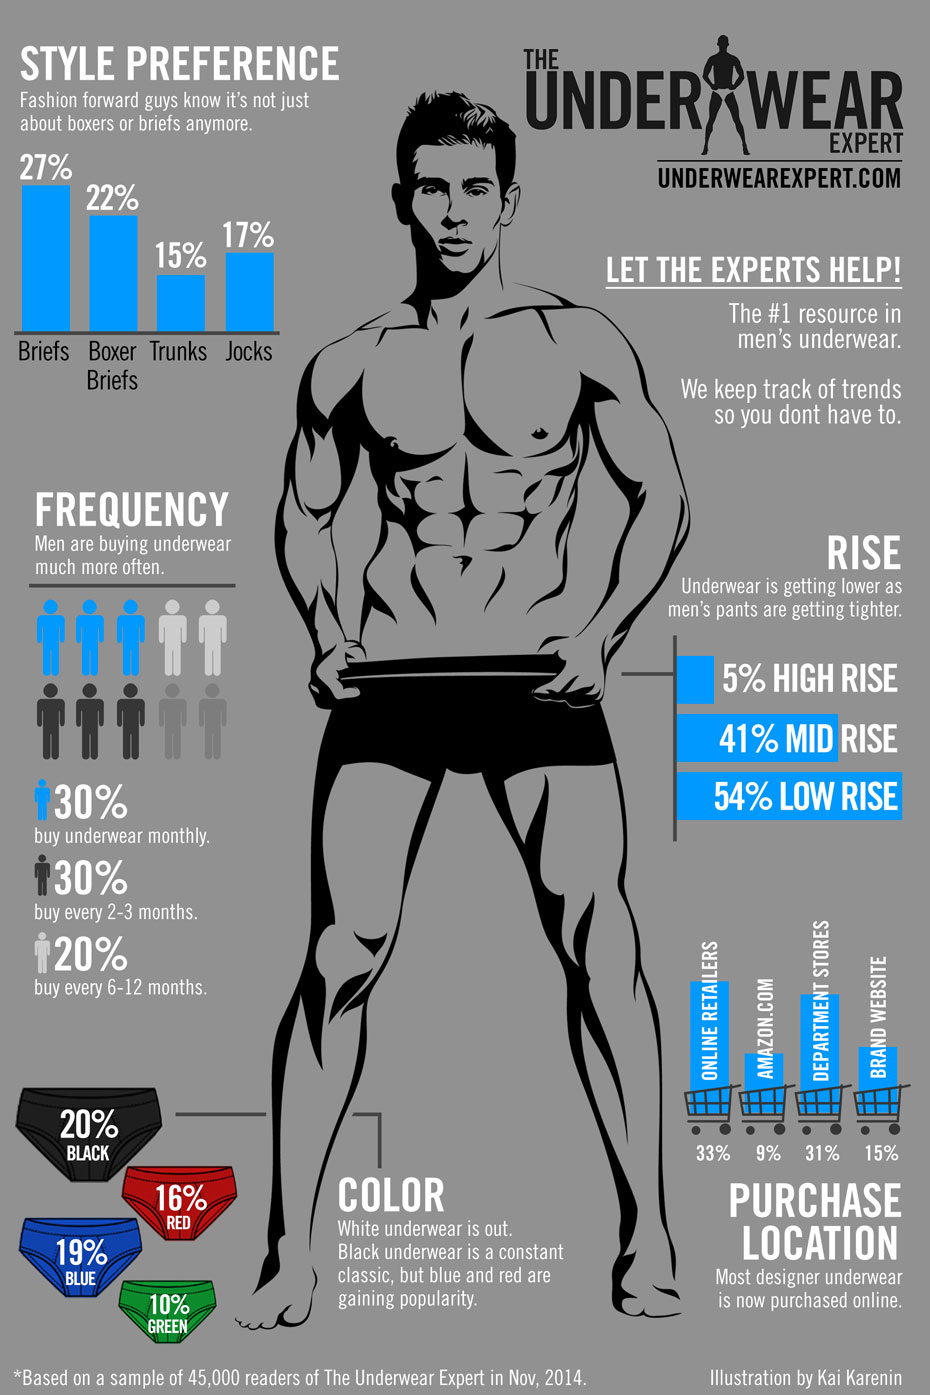 Men's Underwear Style and Trend Infographic by The Underwear Expert